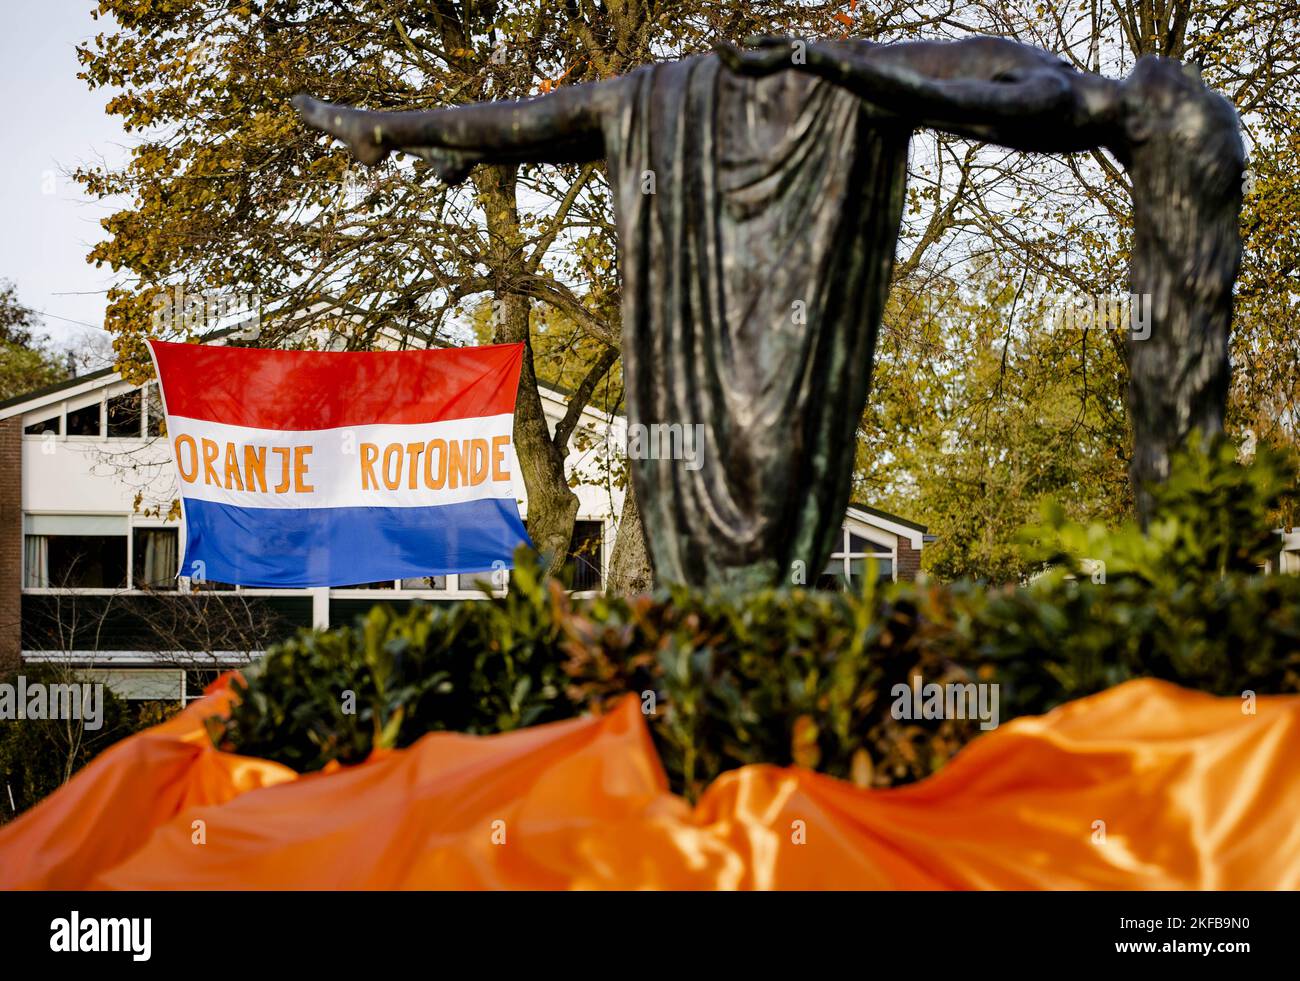 APELDOORN - A roundabout has been decorated in the run-up to the World Cup in Qatar. The so-called Orange Roundabout has been the gathering point for parties after matches of the Dutch national team for many years. ANP SEM VAN DER WAAL netherlands out - belgium out Stock Photo